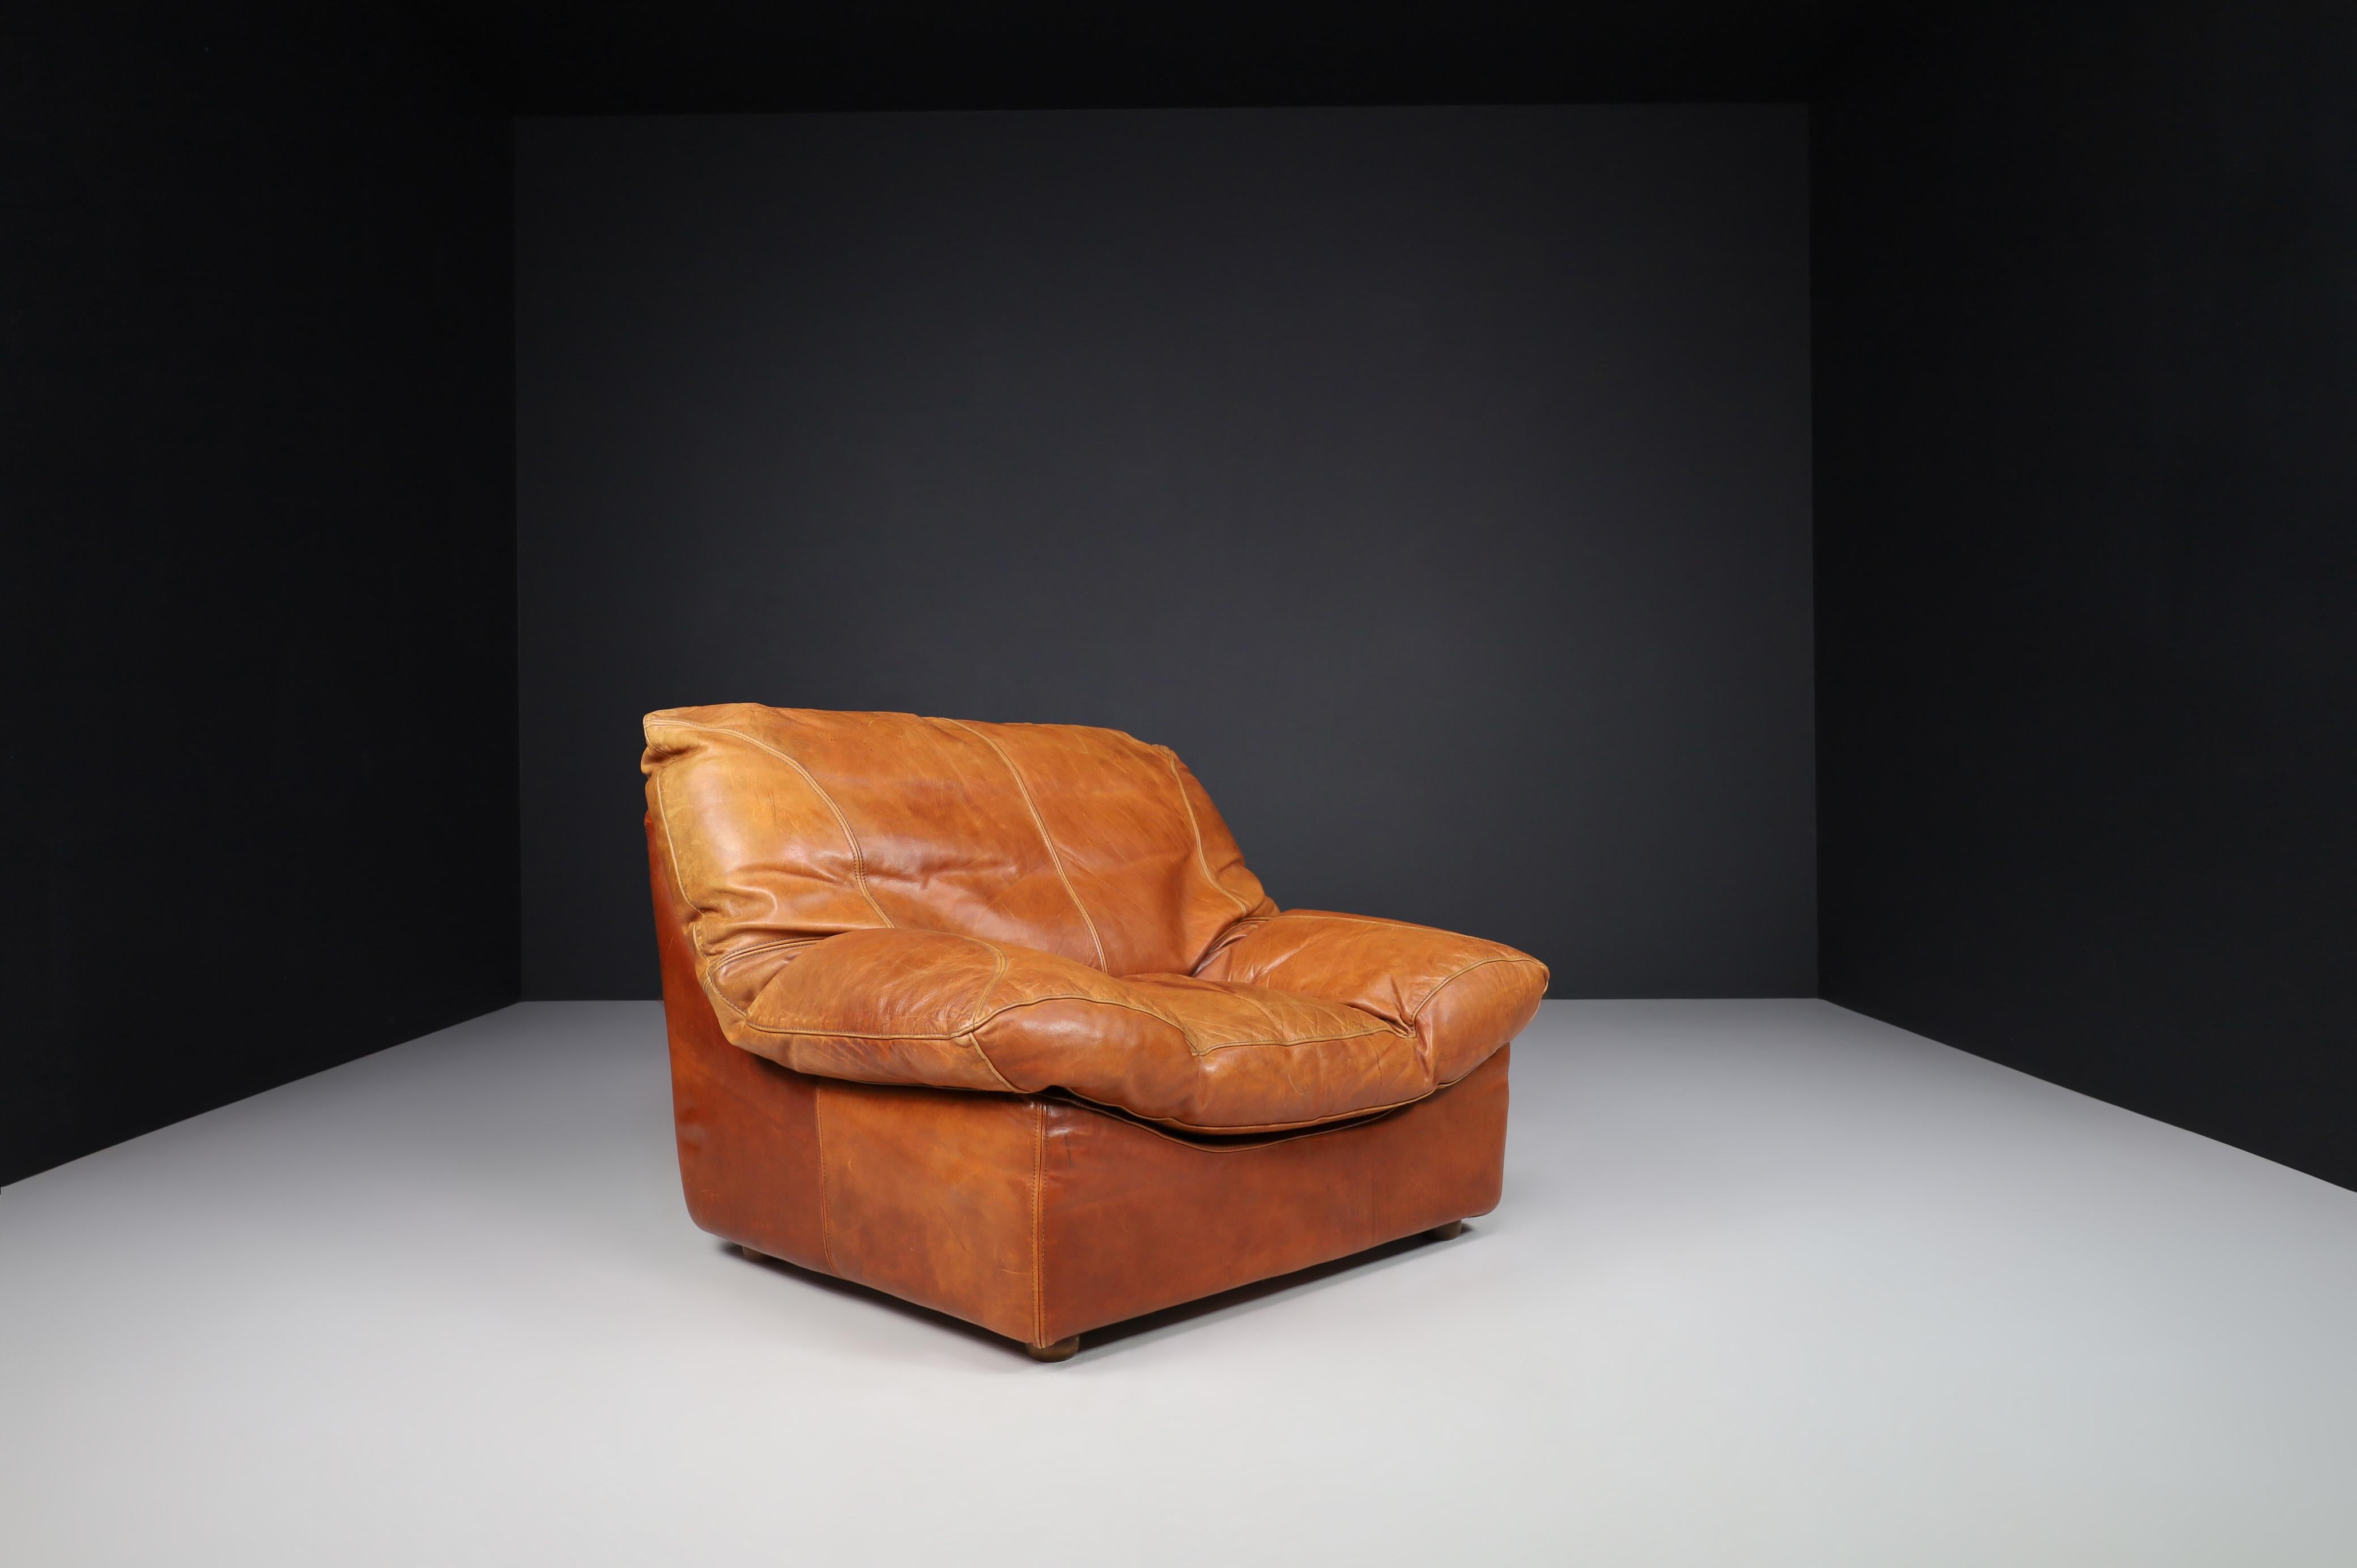 Lounge chairs in Patinated Cognac leather, France 1970.

Oversized, large, modern lounge armchairs that feature straight lines and shapes invite you to take a seat and relax—designed in France in the 1970s. Well-proportioned brown patinated cognac